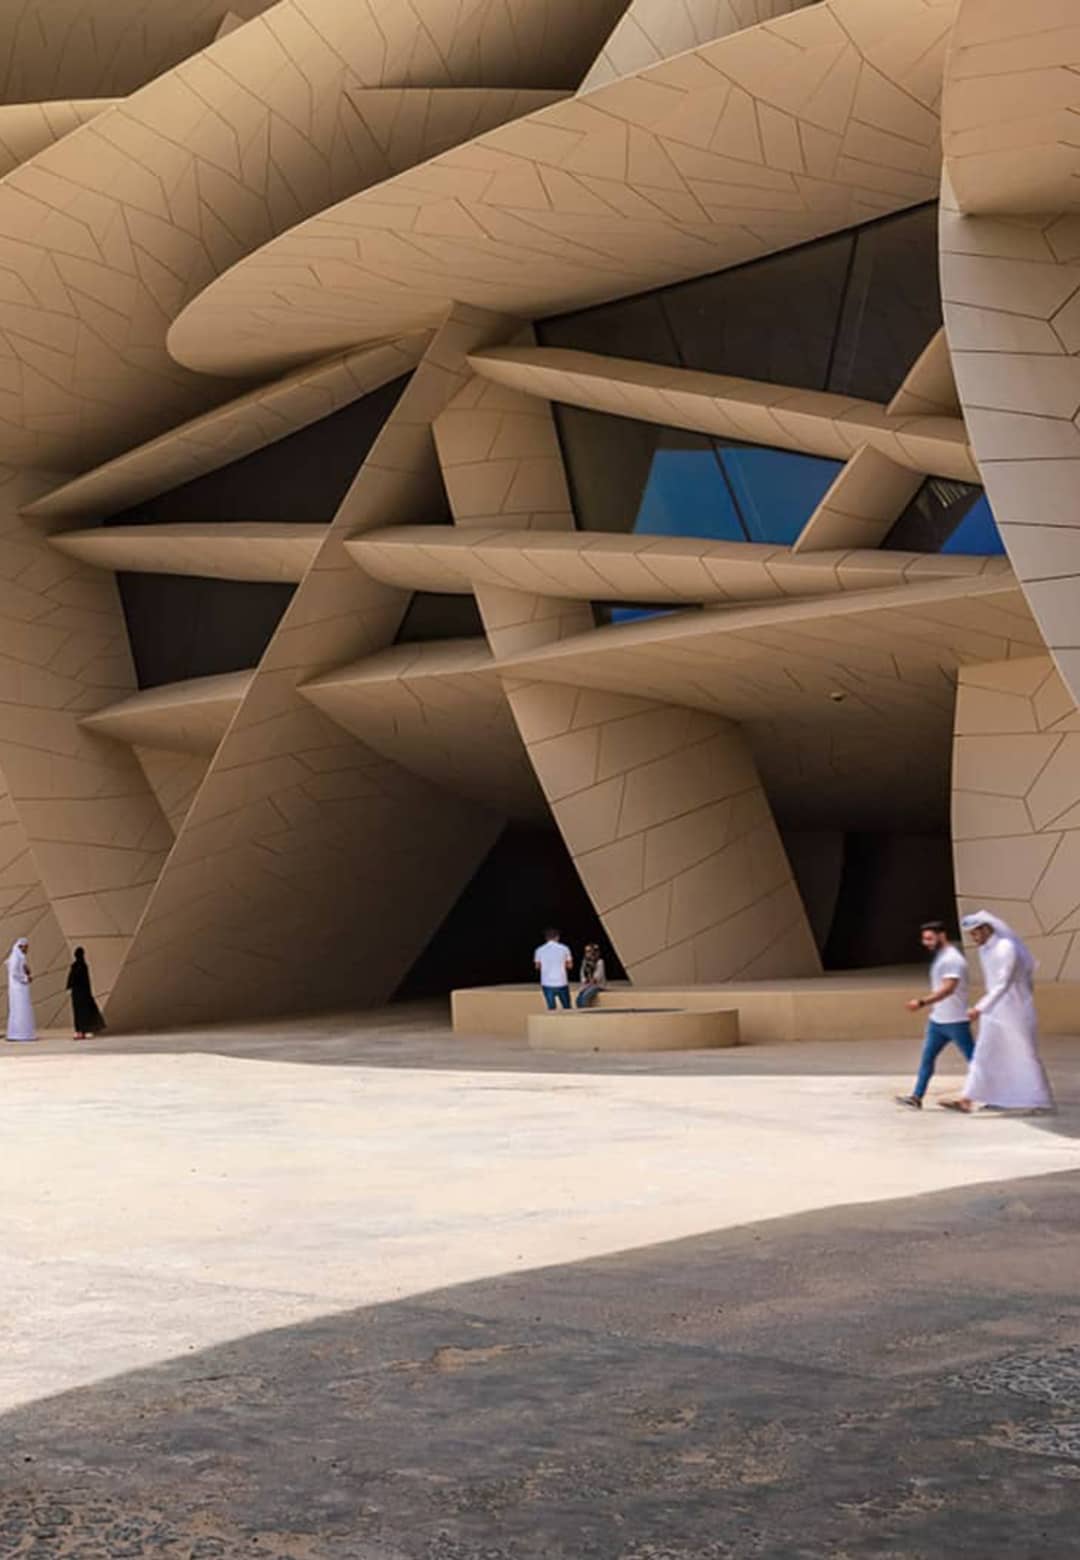 The new National Museum of Qatar